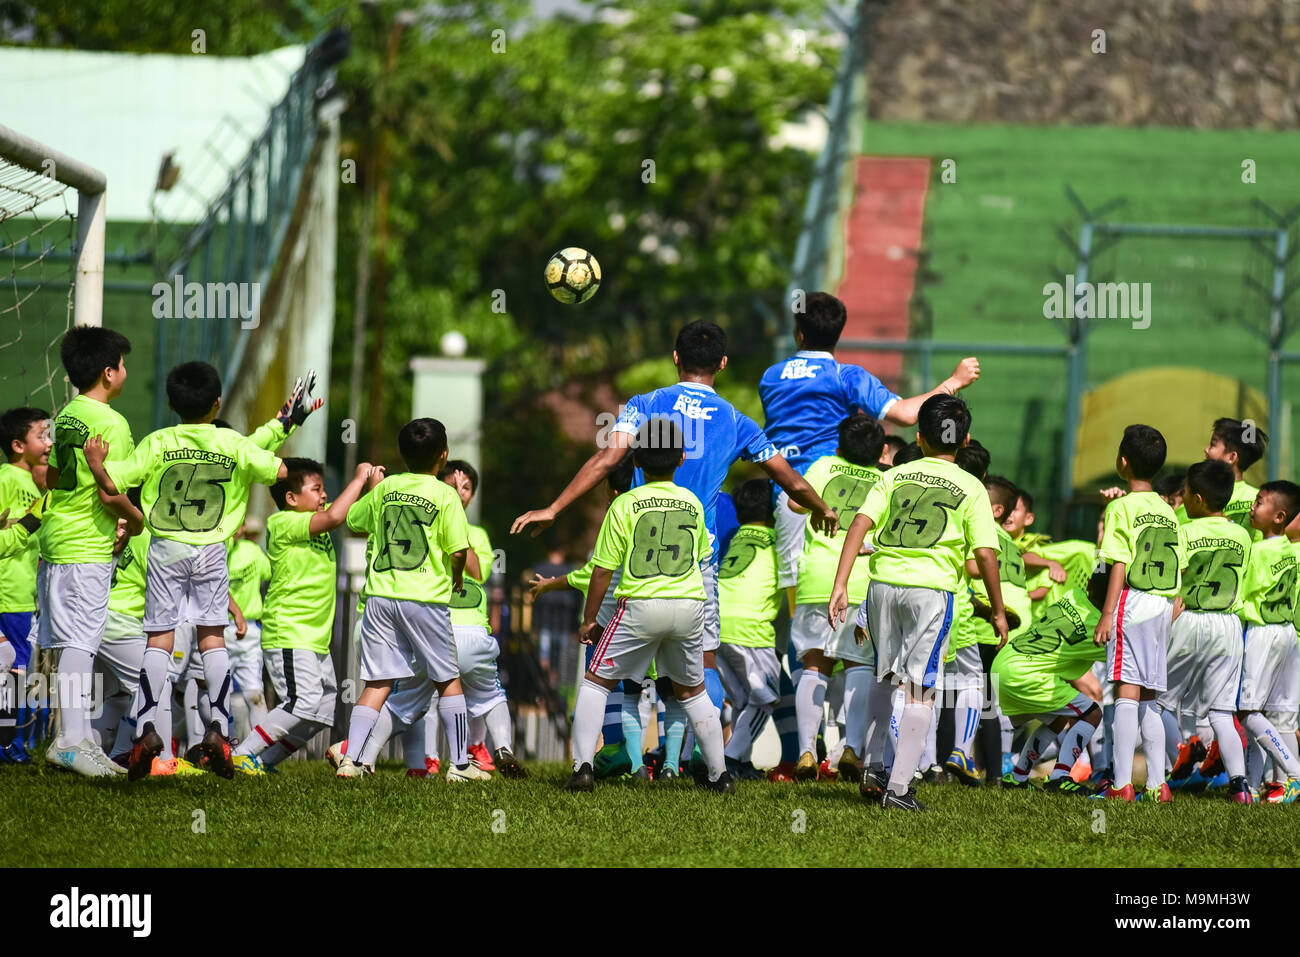 Five players of Indonesian football club of Persib Bandung play against 85 children in an exhibition match to celebrate its 85th anniversary. Stock Photo